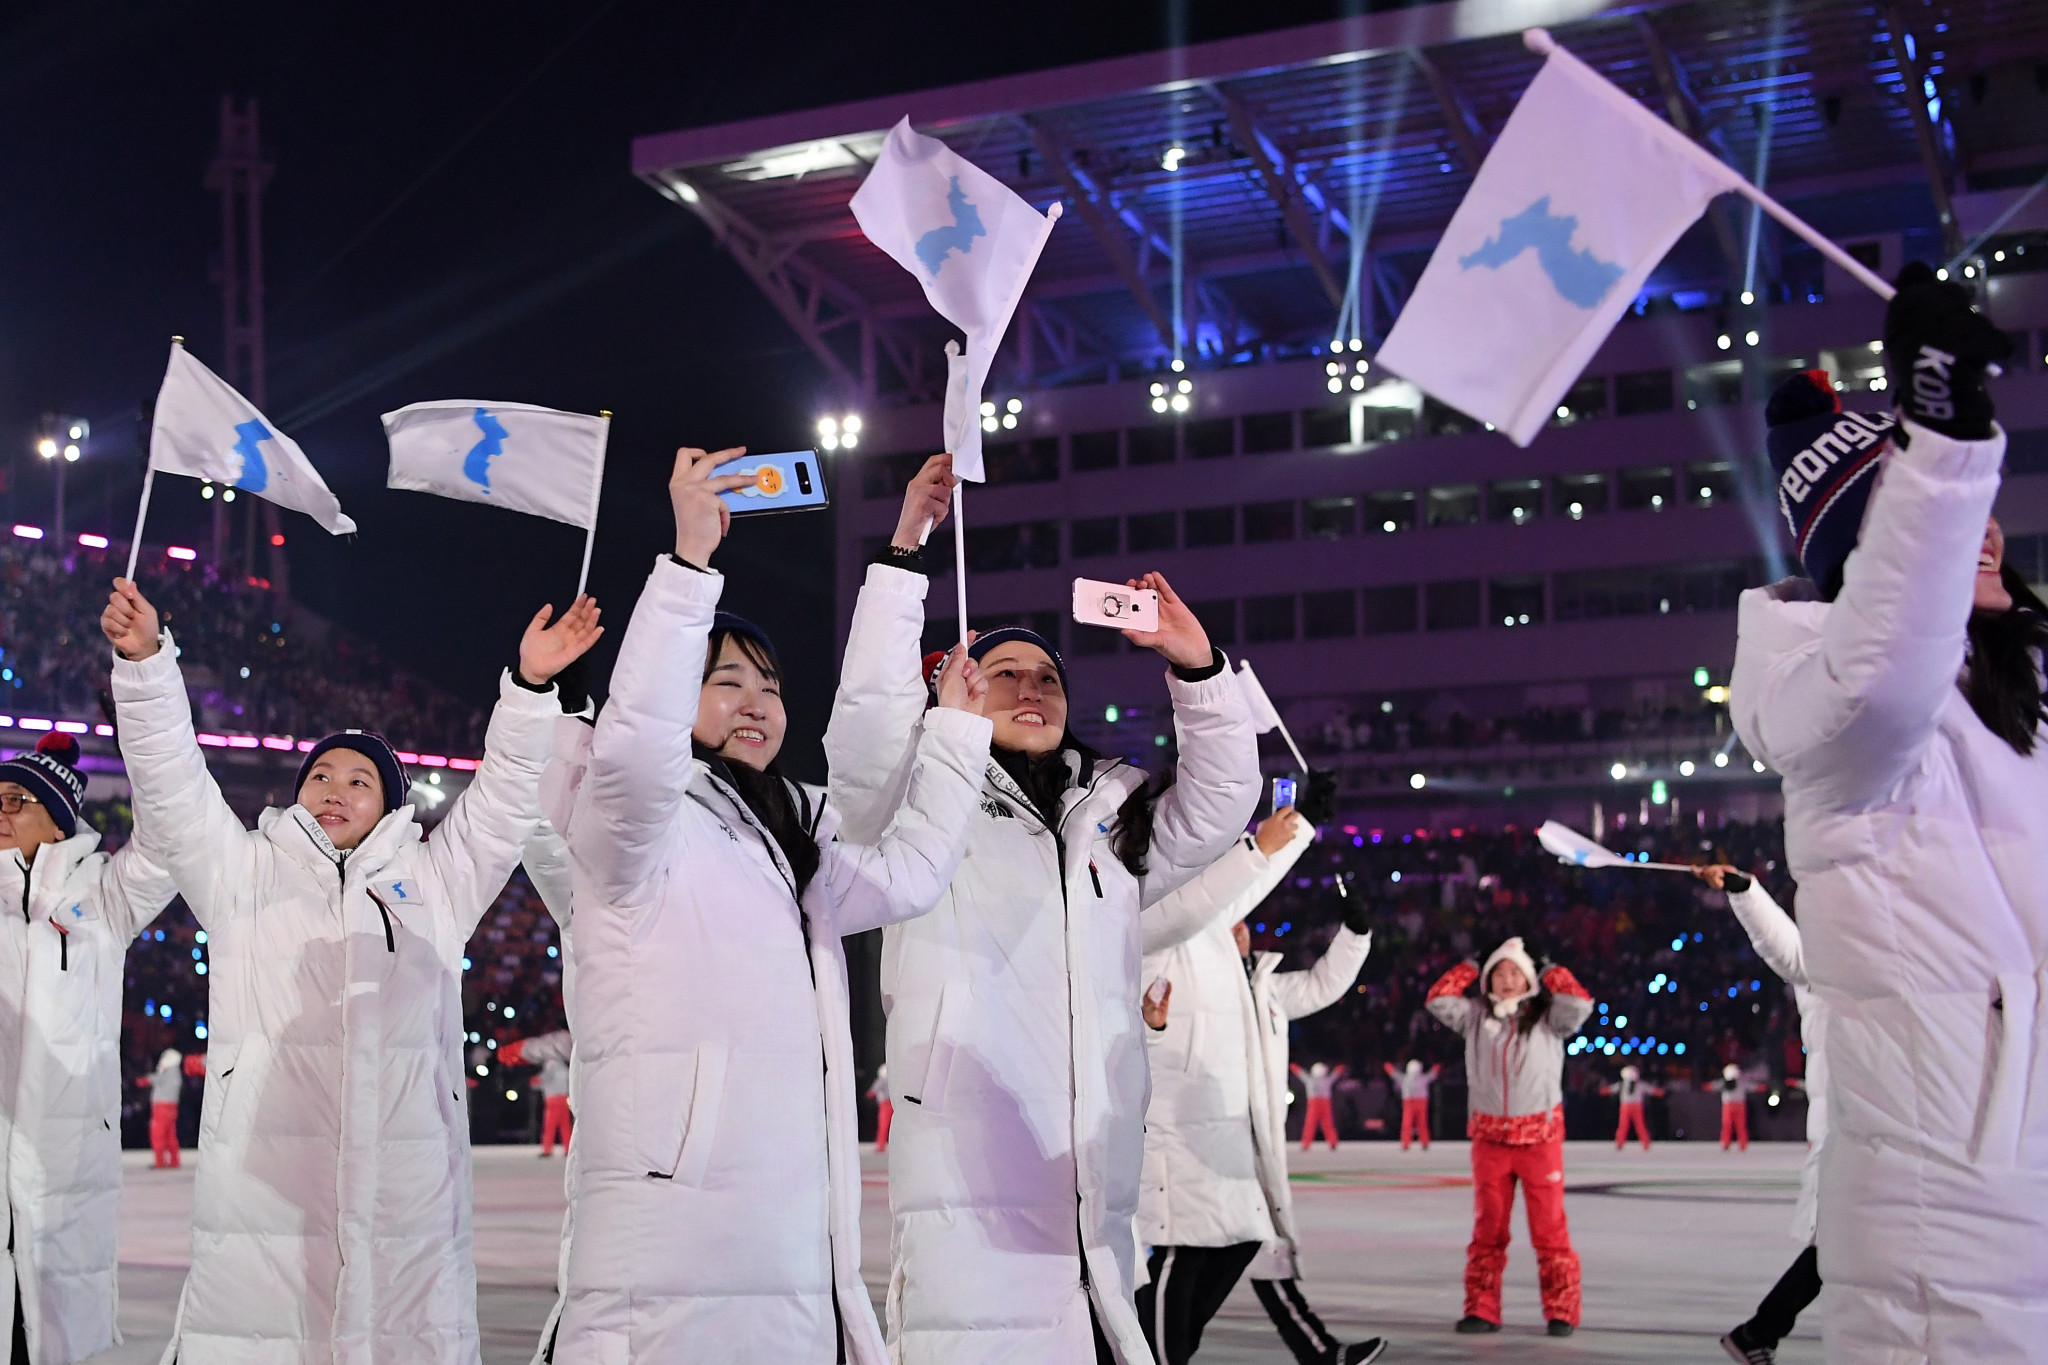 A moment of Korean unity was shown at the Pyeongchang 2018 Winter Olympics when athletes carried the unified flag ©Getty Images